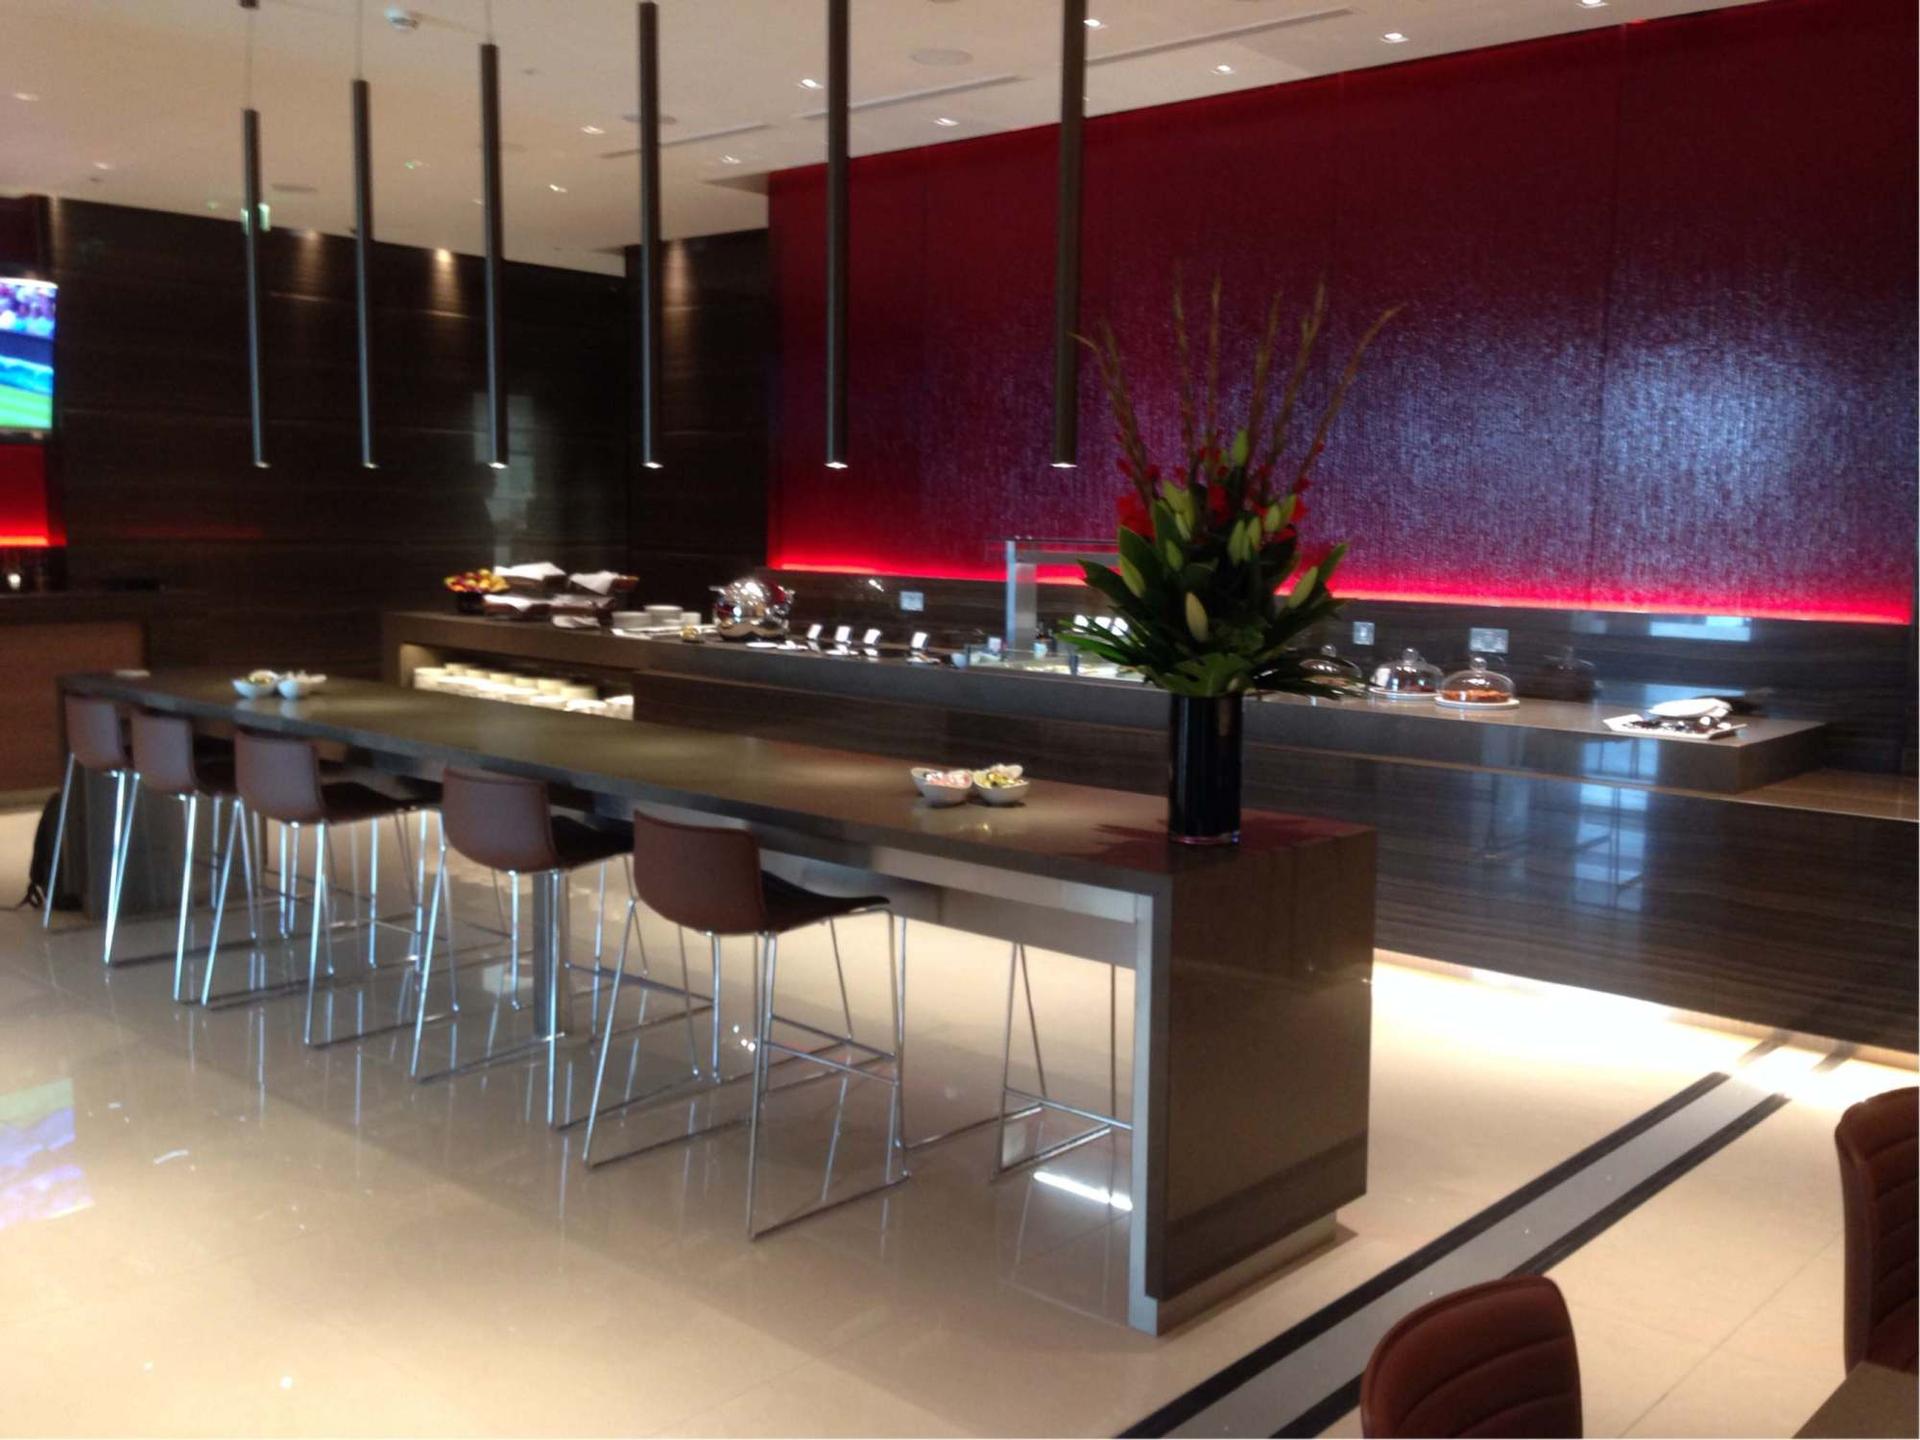 Air Canada Maple Leaf Lounge image 9 of 27